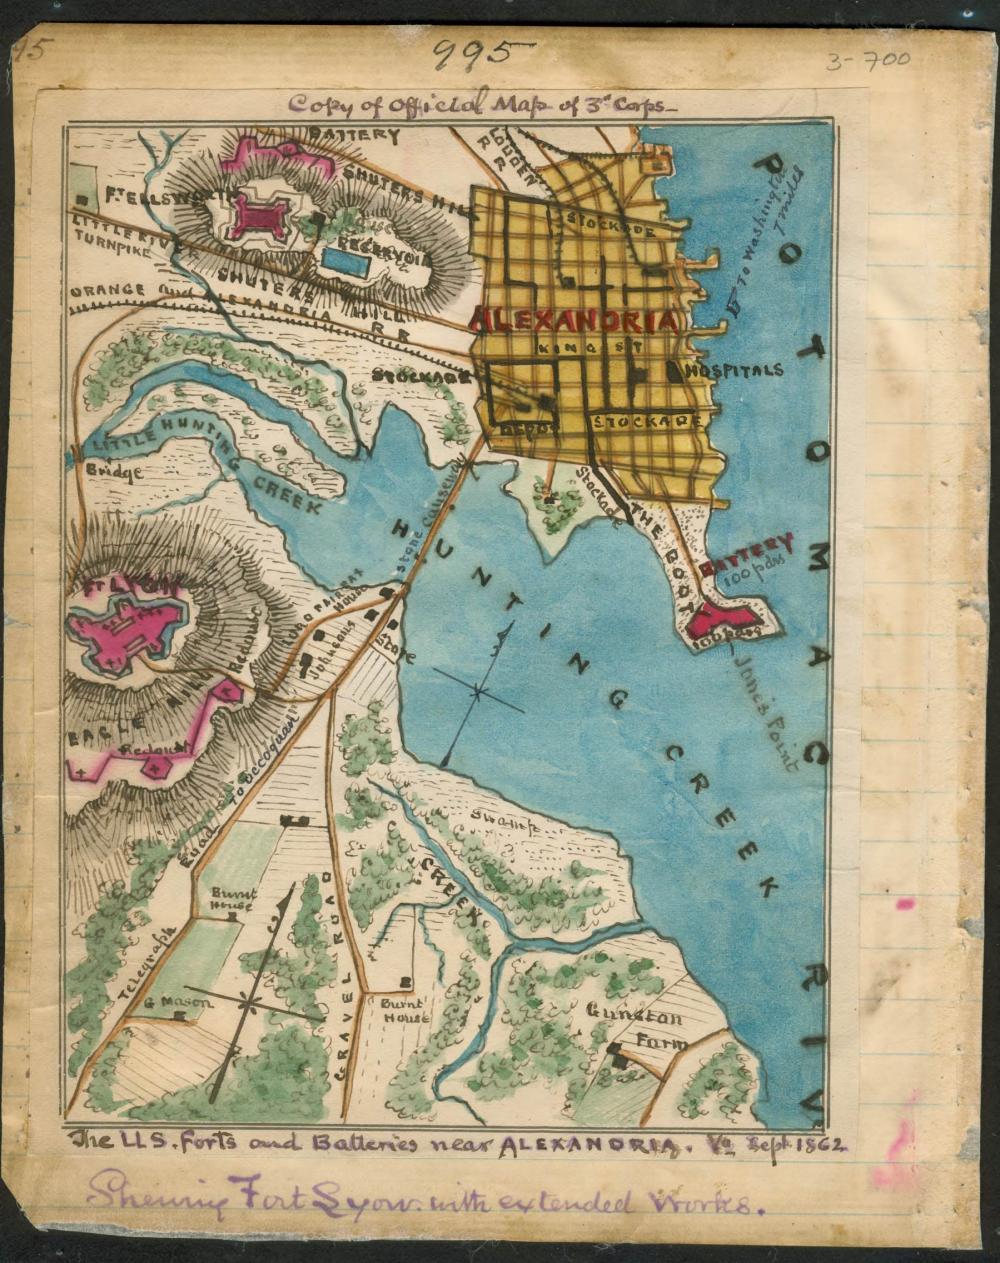 1862, Sneden Map of U.S. Forts and Batteries near Alexandria (Library of Congress)